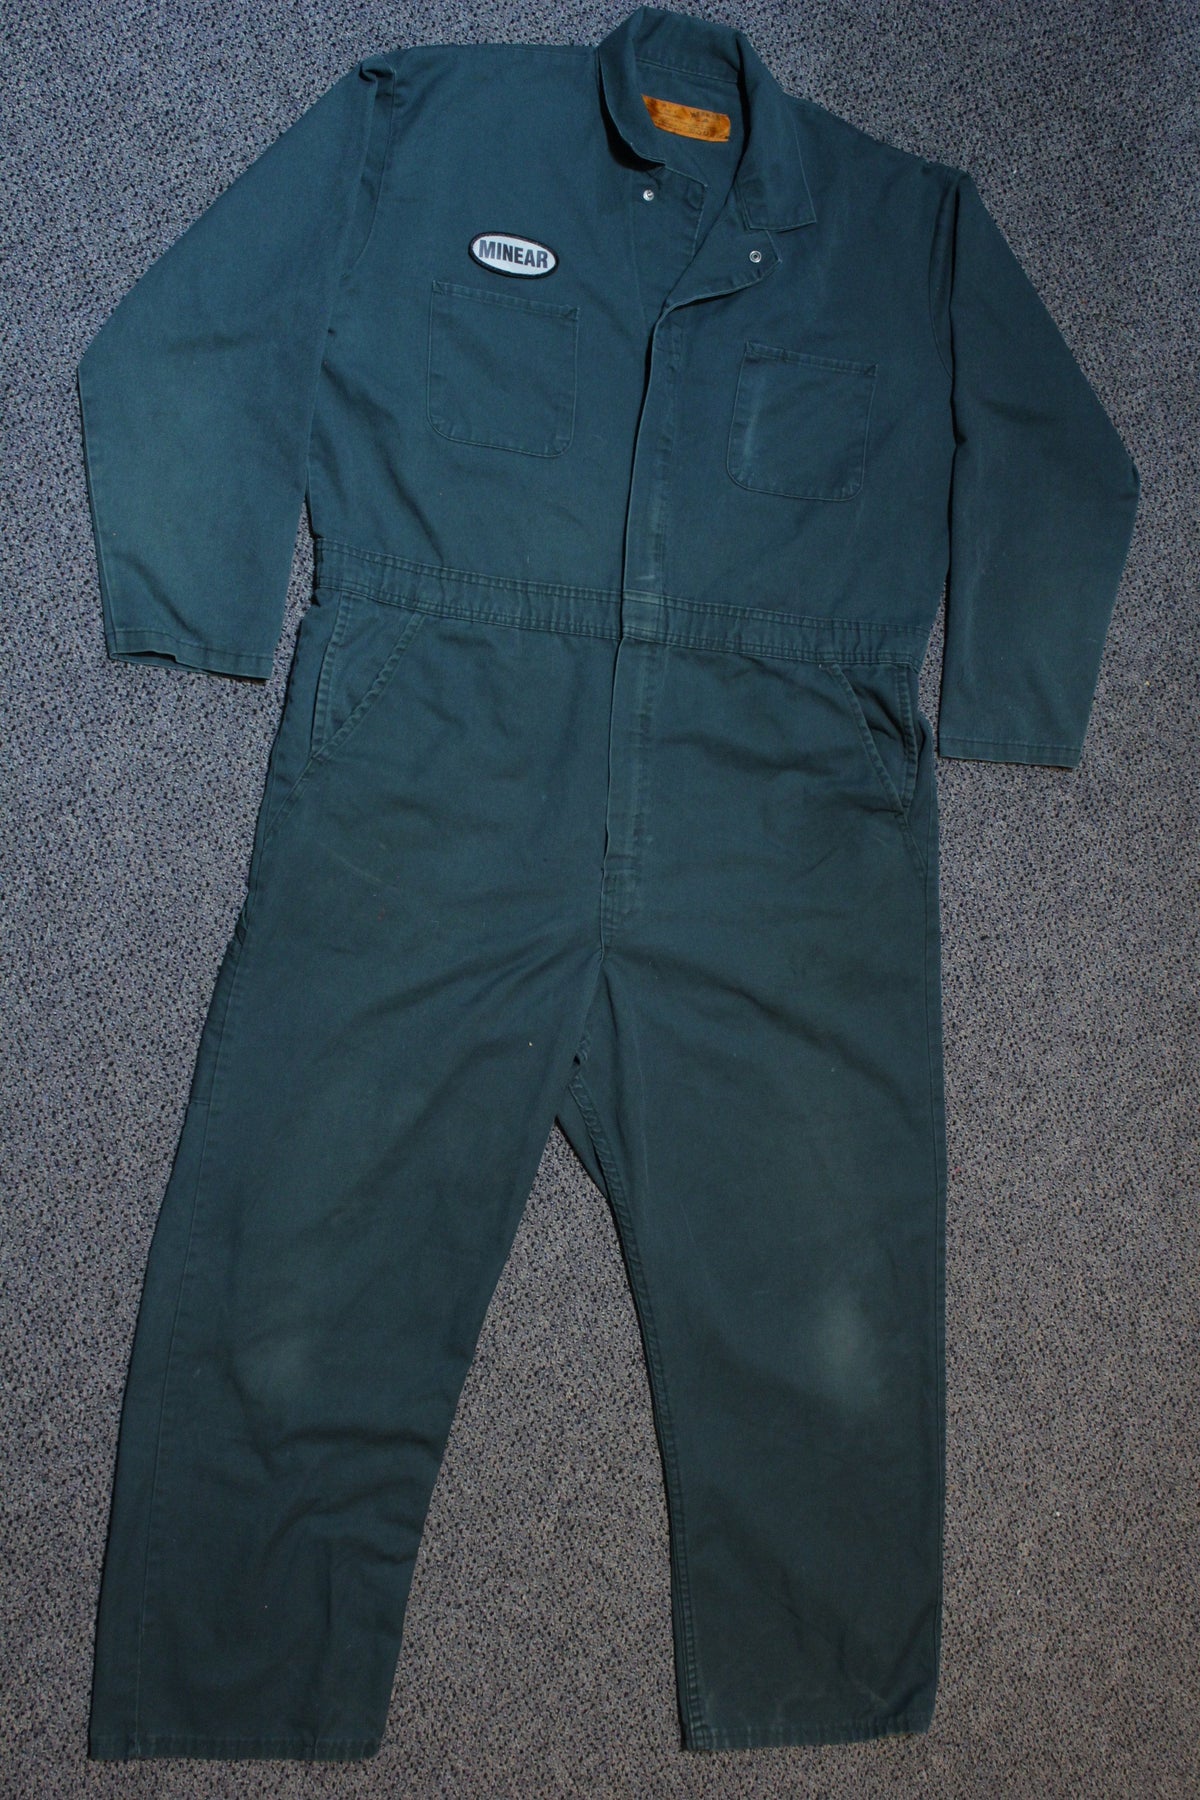 Red Kap Minear Distressed Mechanic Union Suit Coveralls Overalls Green Long Sleeve